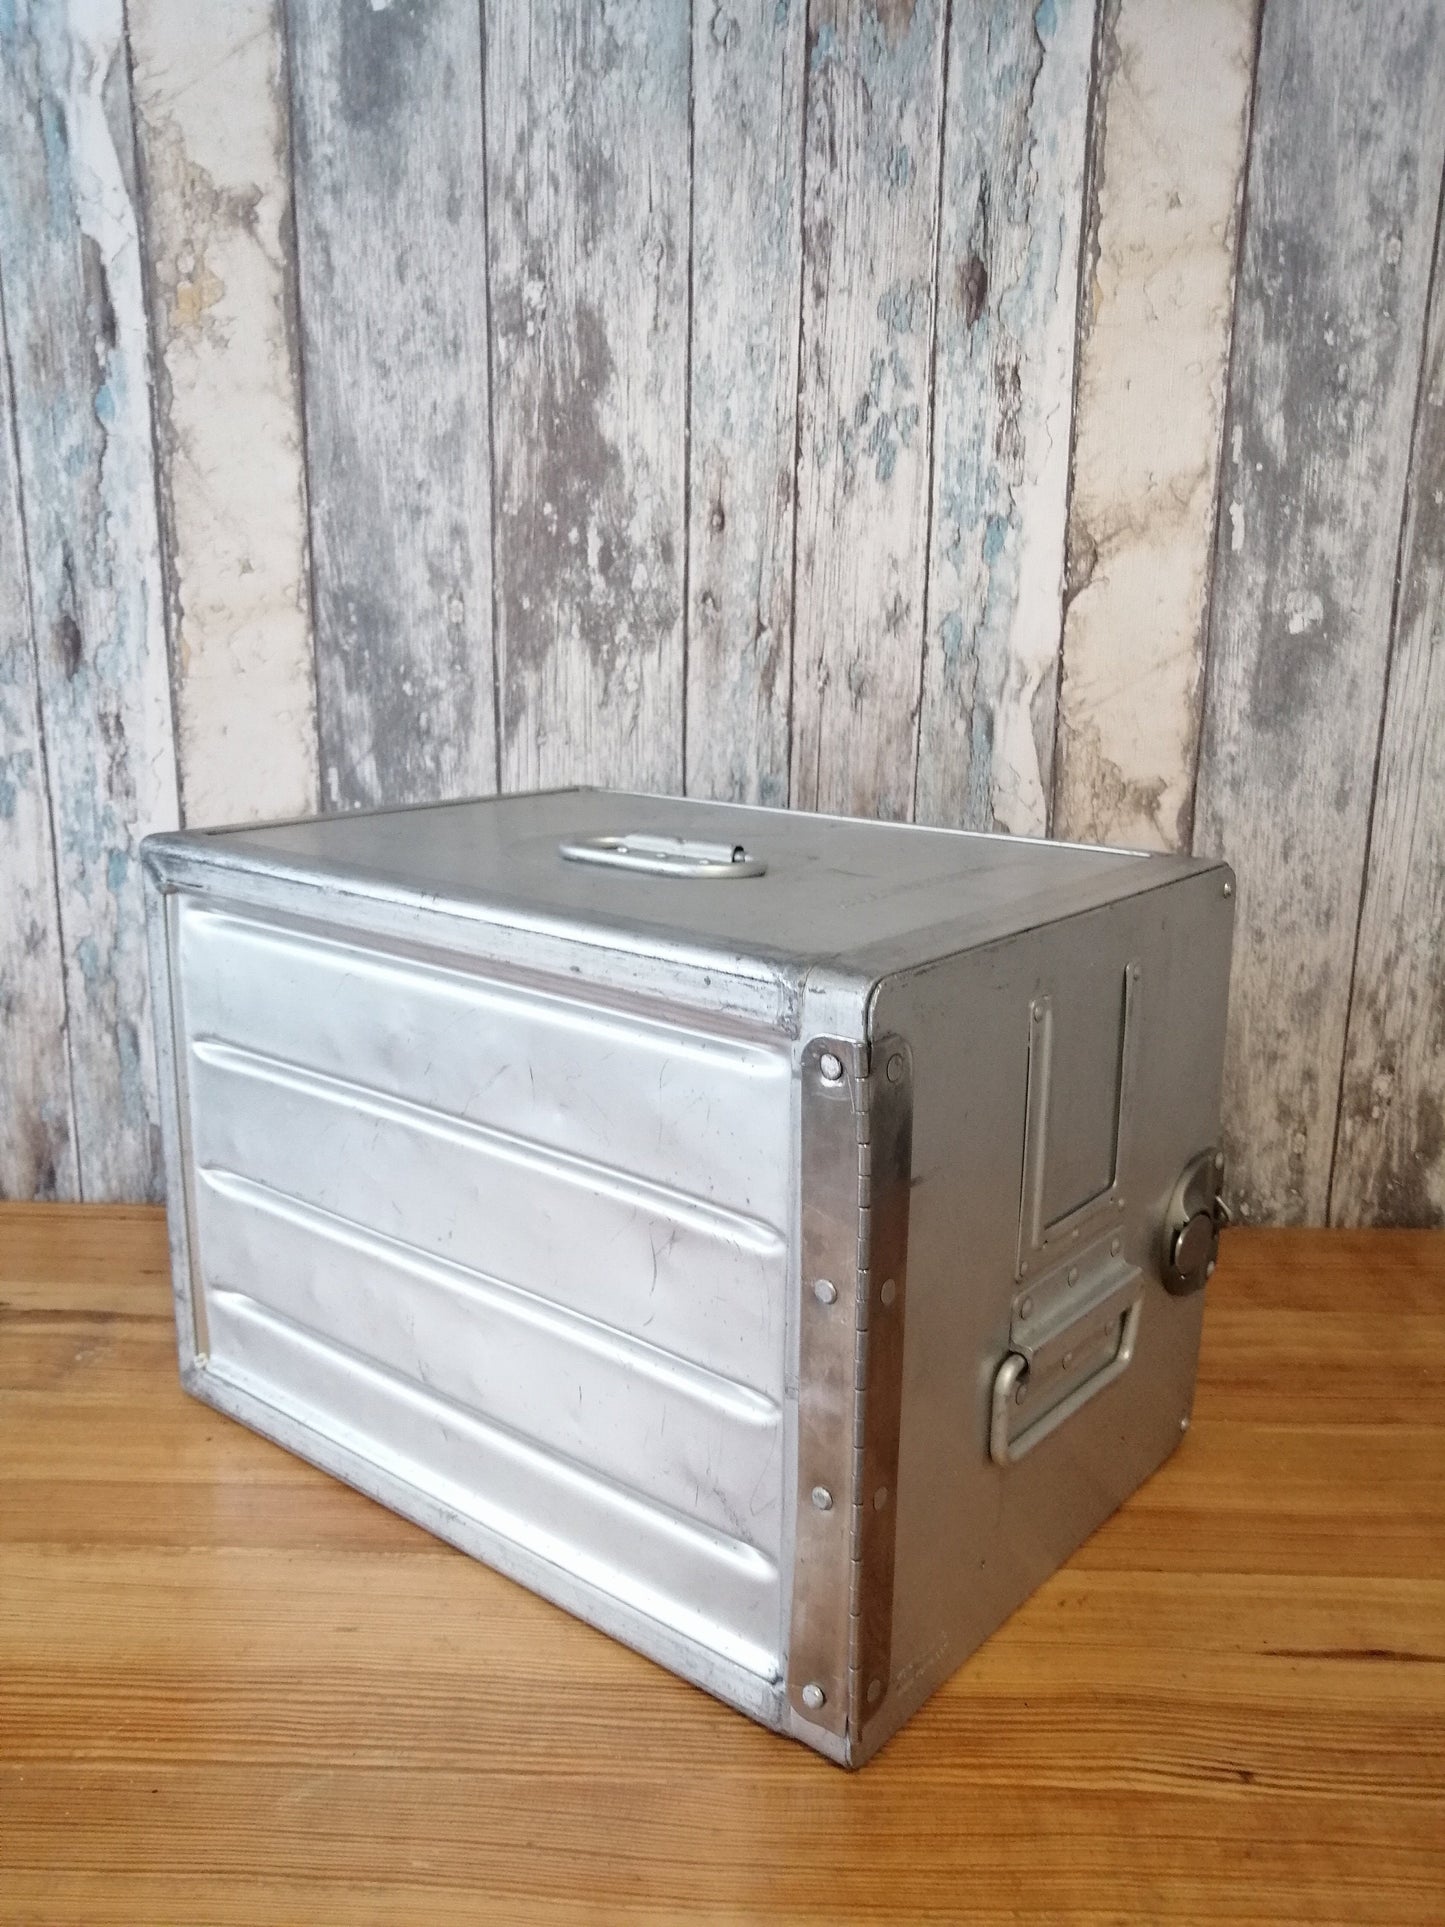 Air India Original Airline Galley Box, Aircraft Storage Container, Industrial Cabinet, Night Stand